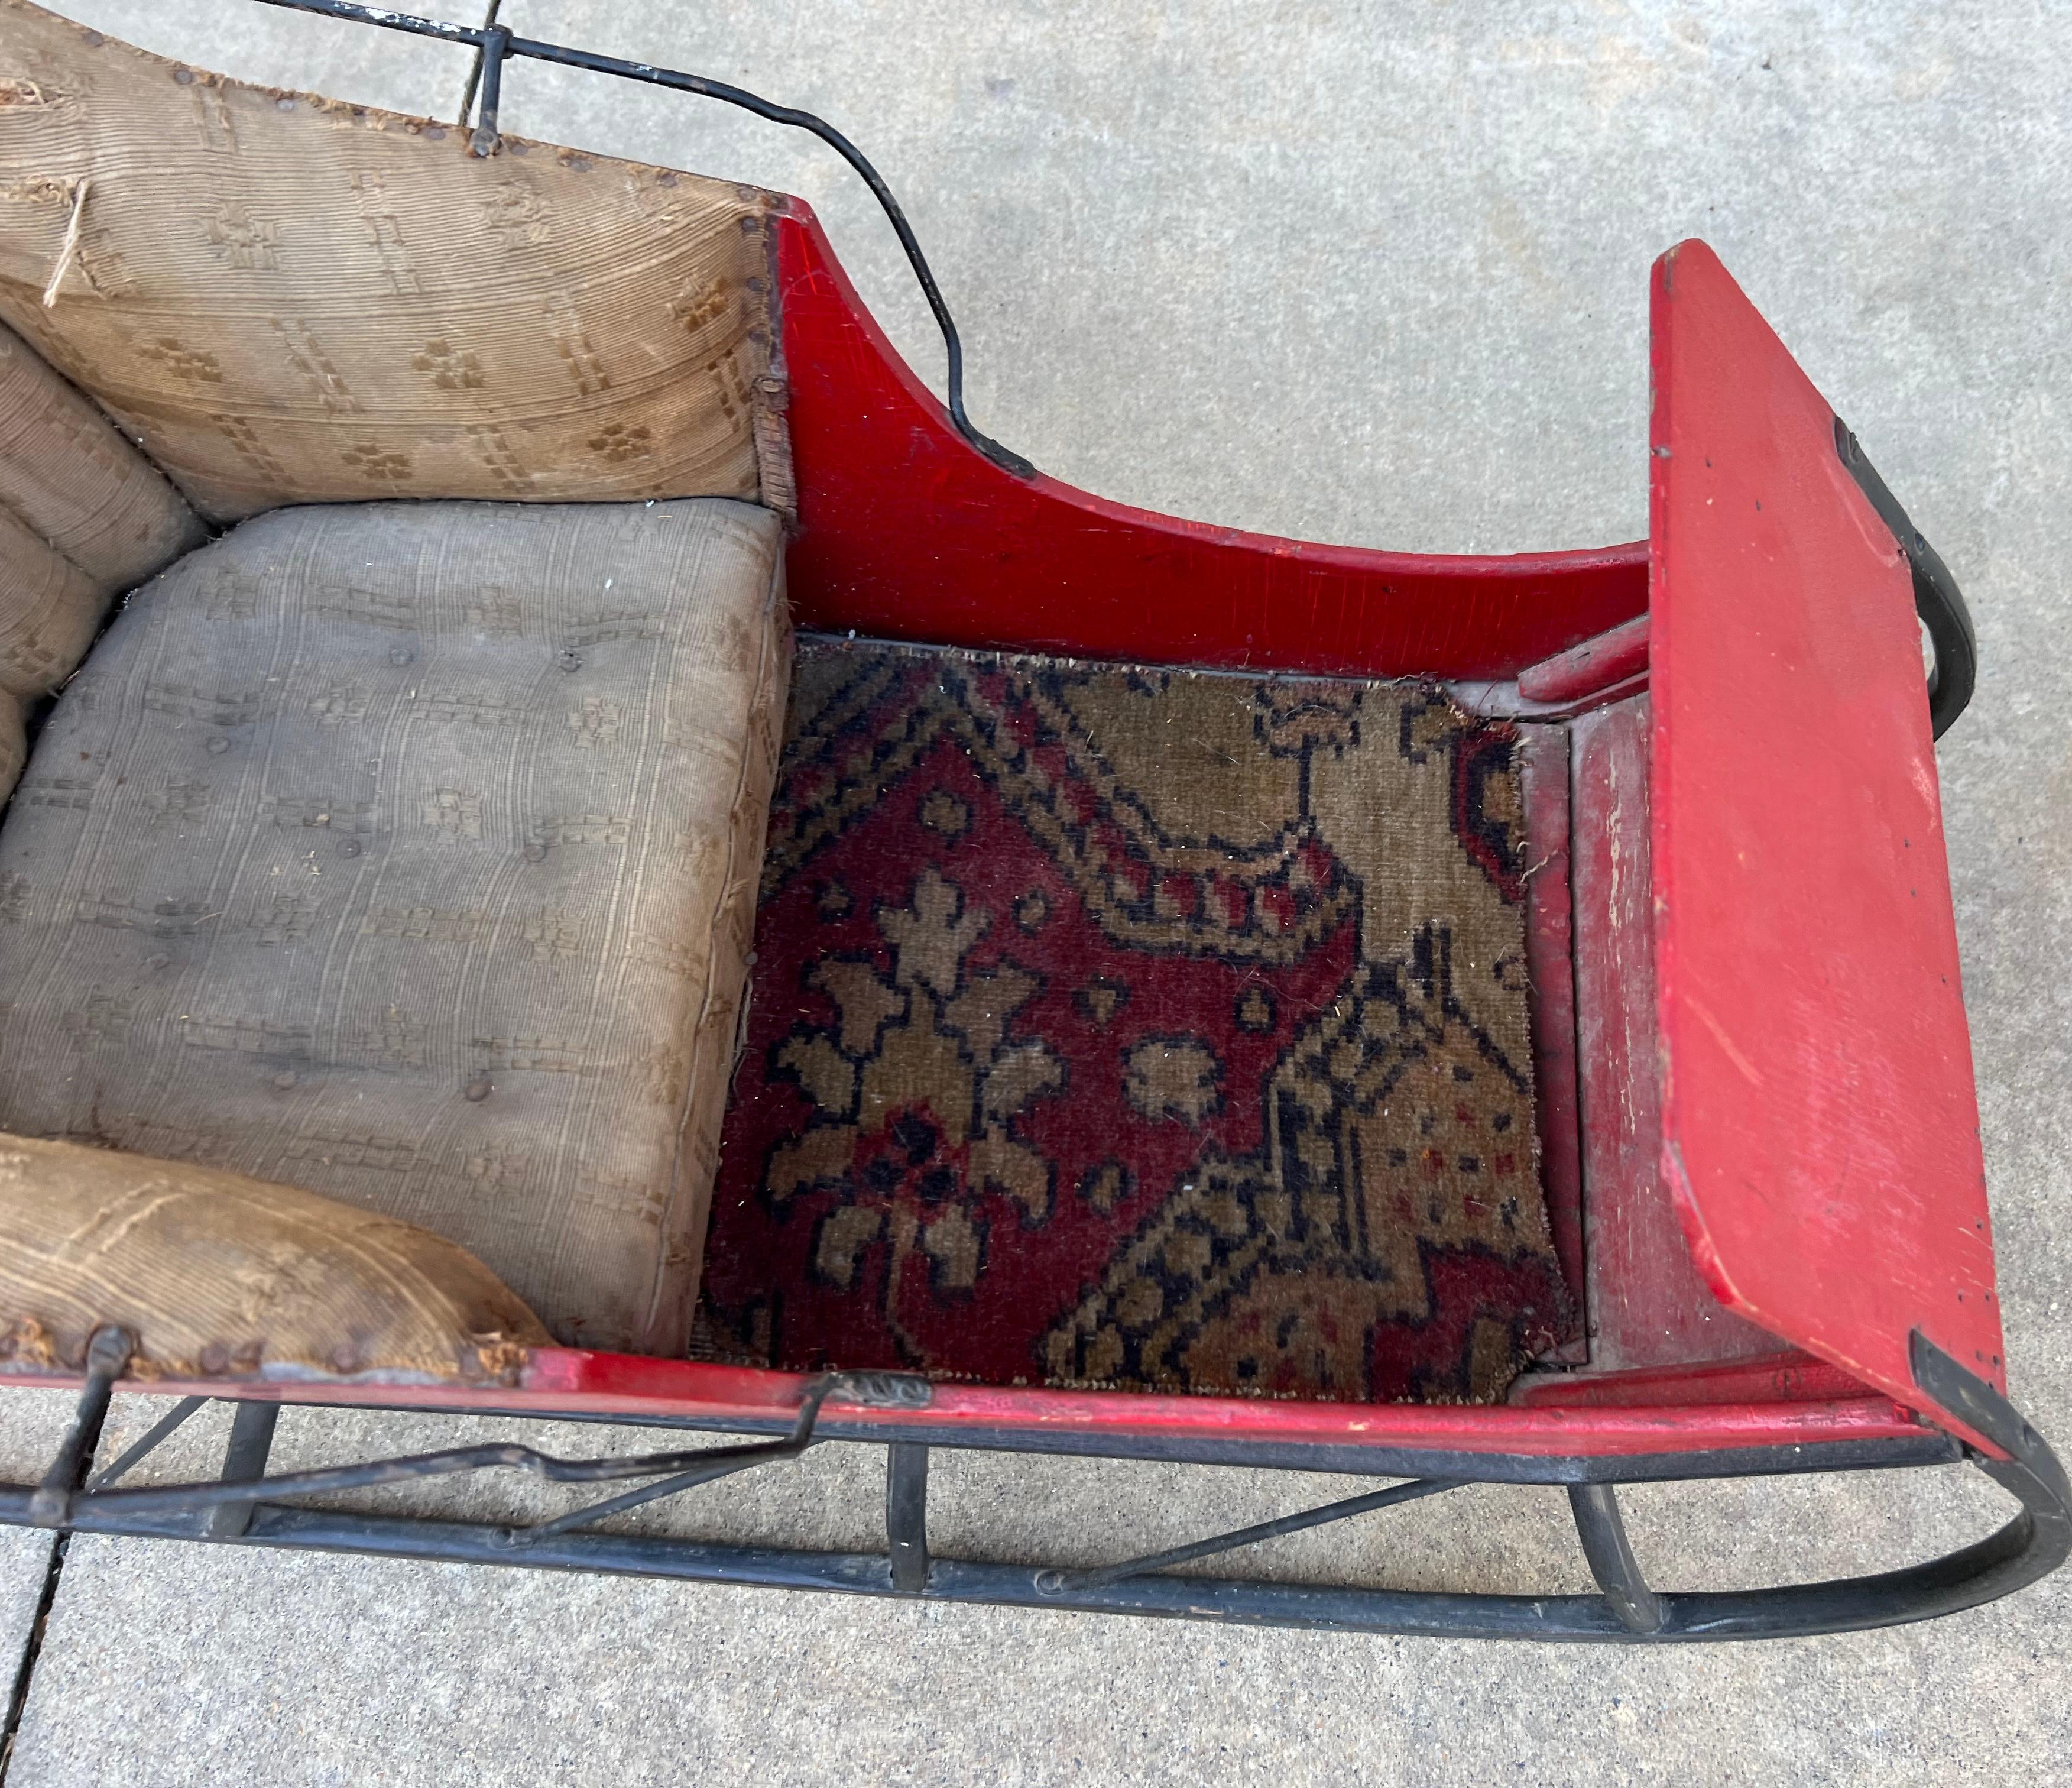 Metal Late 19th-C. Victorian Era Child’s Painted Red Holiday Sleigh